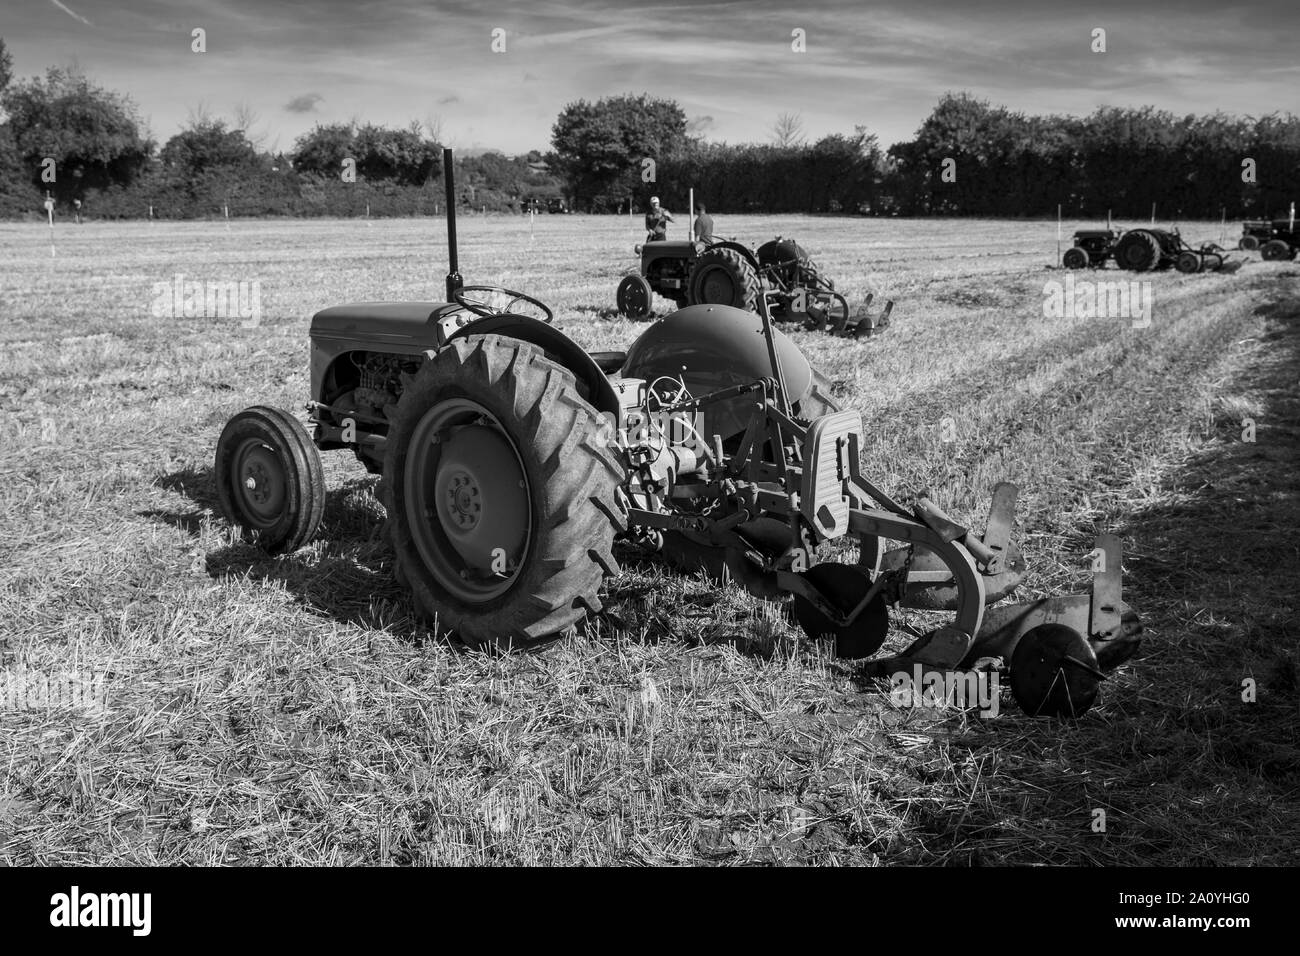 Vintage Tractors at the Vintage Tractor and Ploughing Display at Chew Stoke 2019 Stock Photo